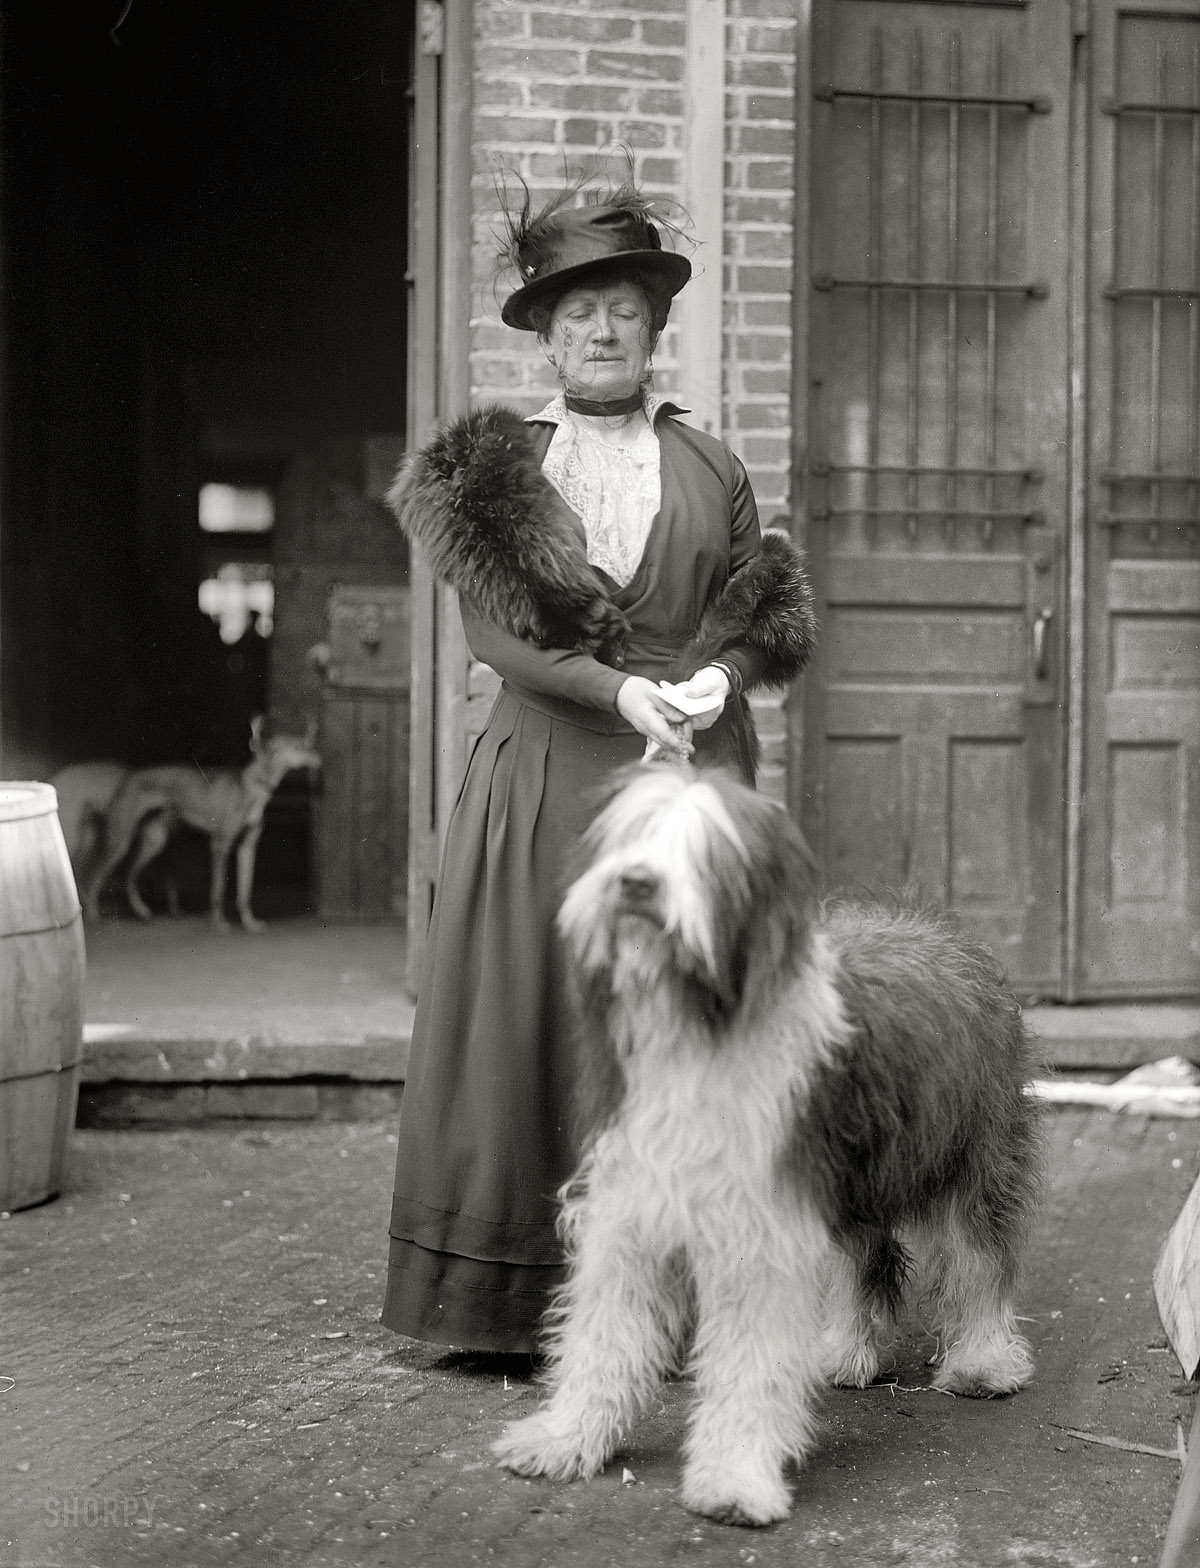 "Miss Mary E. Patton. Dog Show, 1915." One of many images from the Washington dog show of 1915 showing fancy canines and their even fancier owners, all of them female for some reason. Harris & Ewing Collection glass negative. View full size.